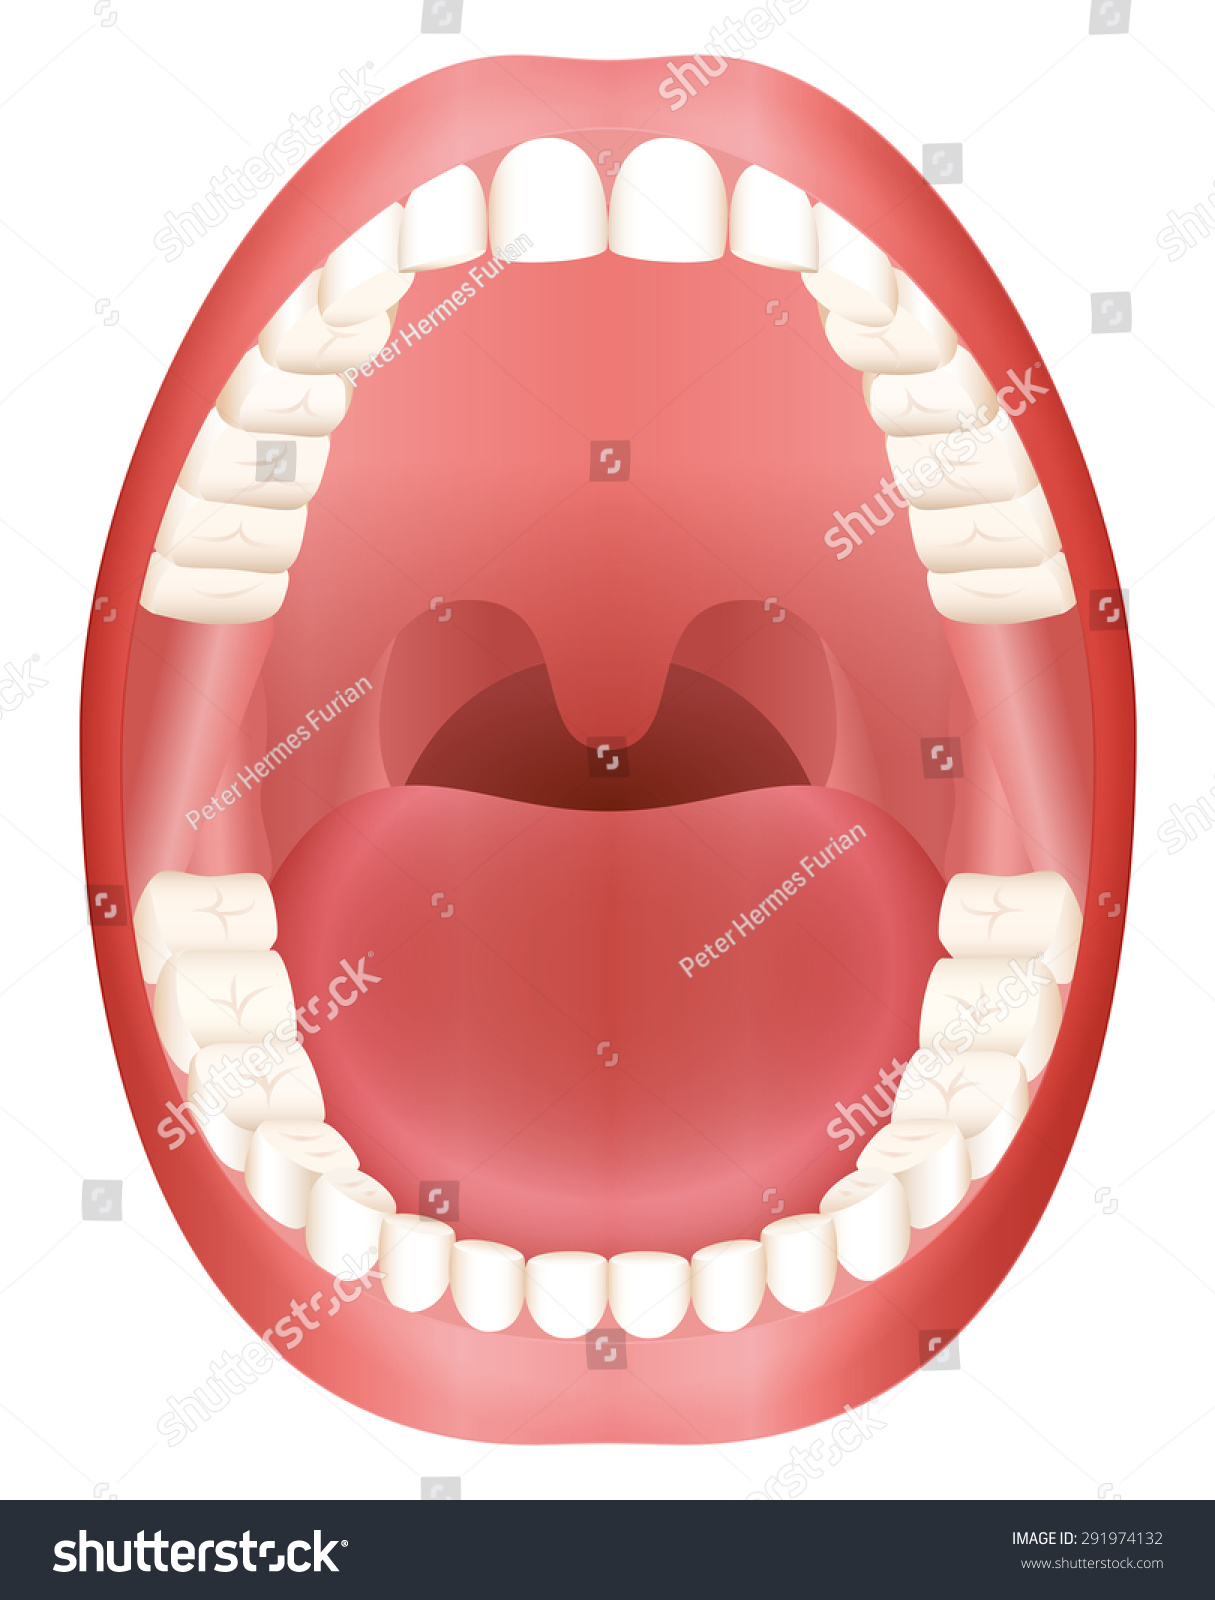 Model Of Mouth 33